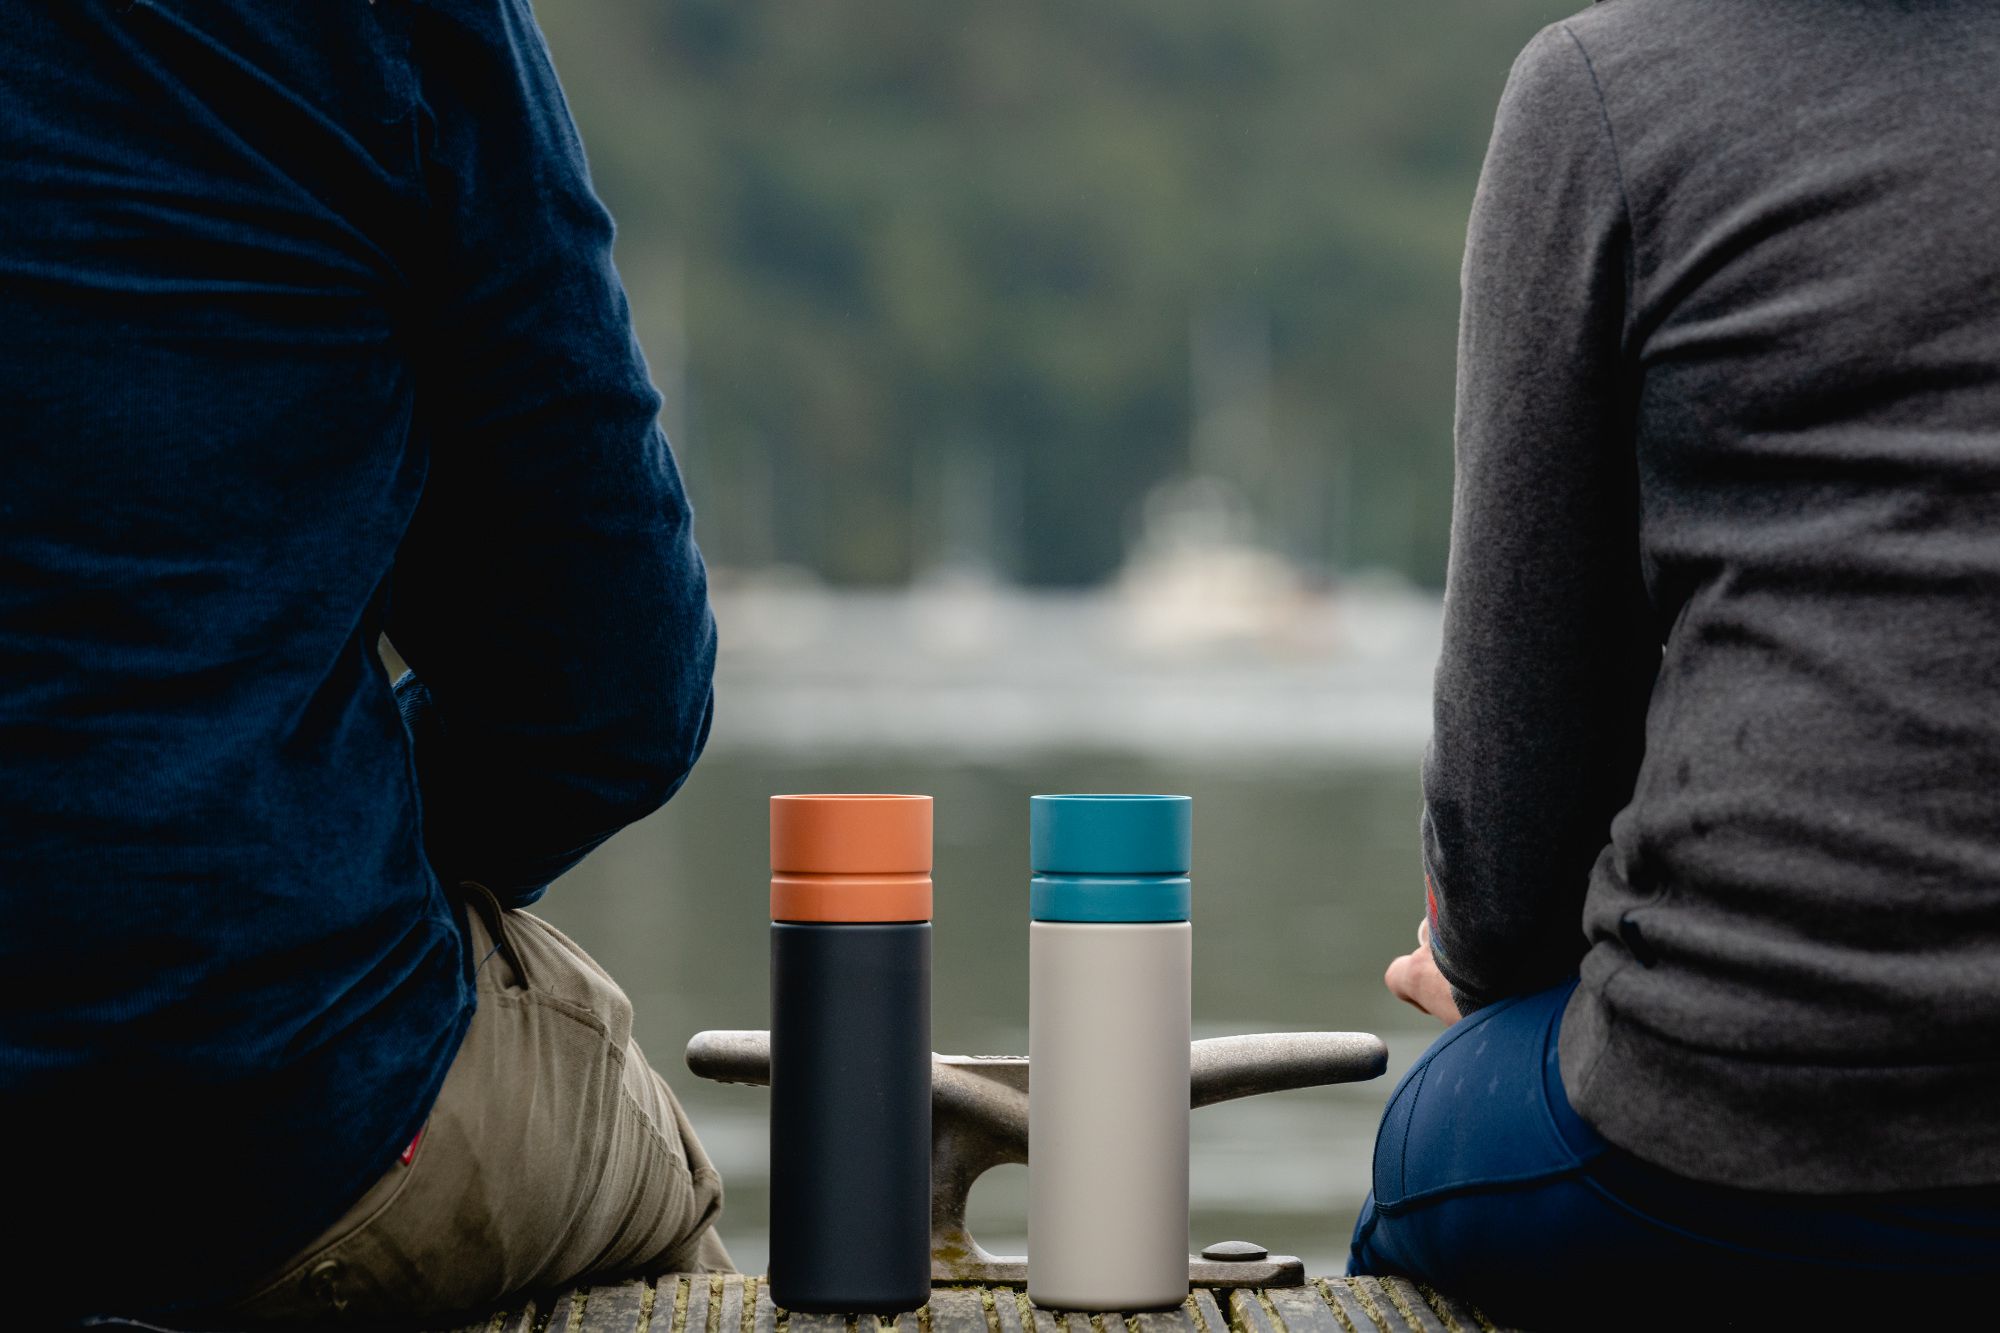 Two Circular&Co. reusable water bottles placed on wooden decking between two people sitting down facing a lake.